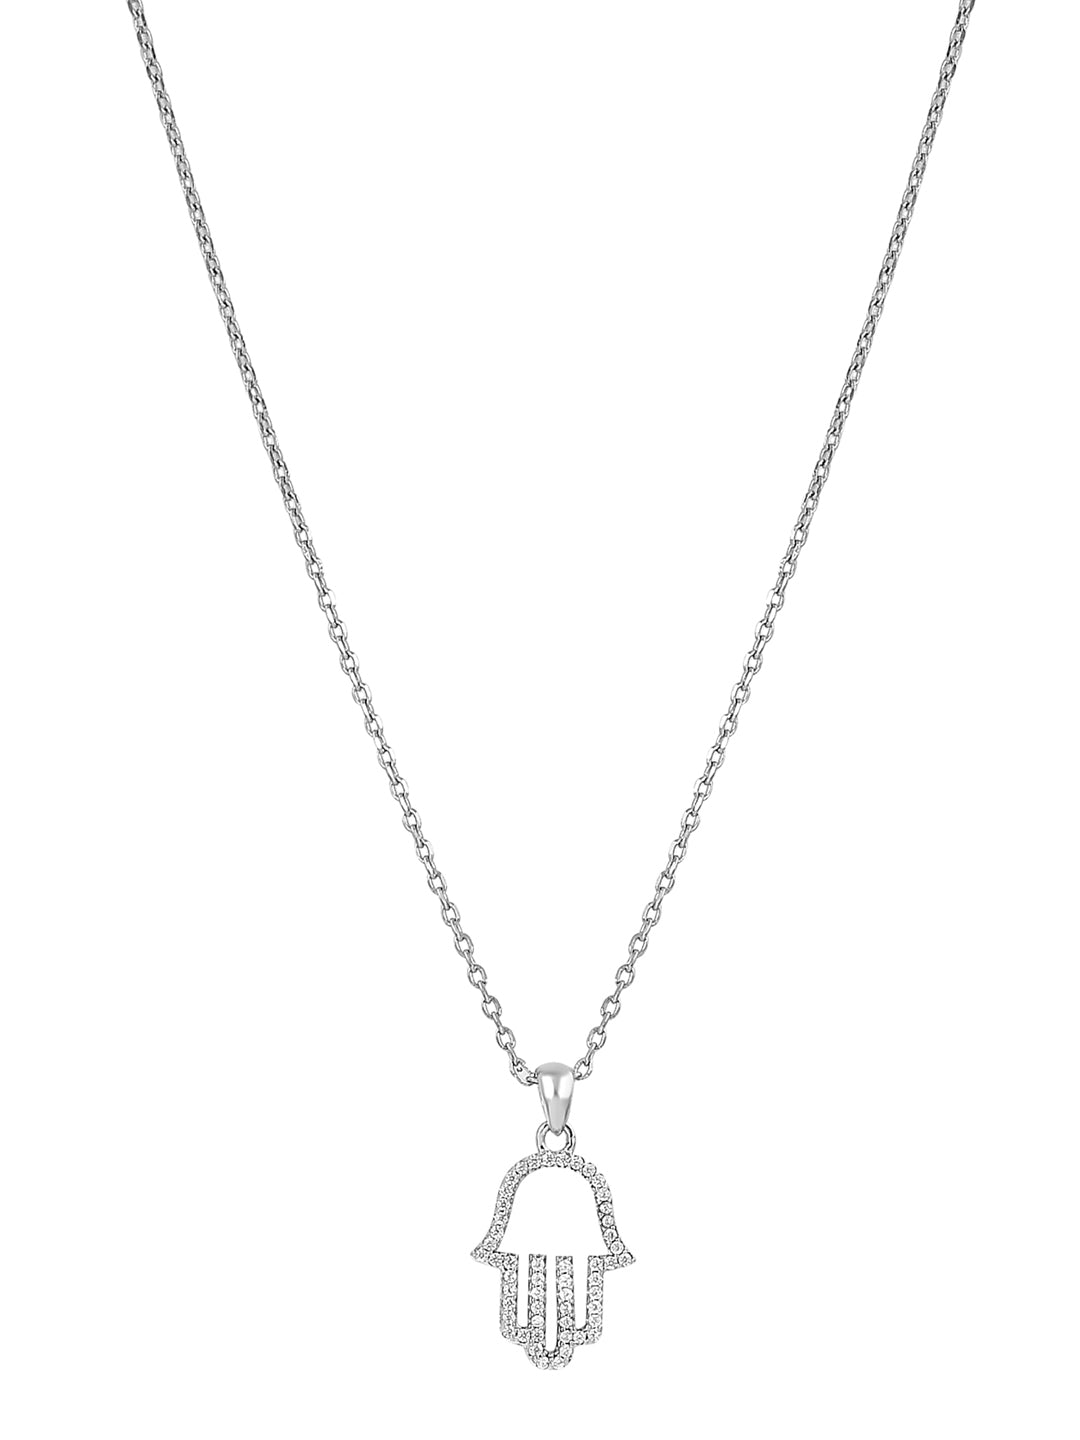 Pure Silver Hand Of Fatima Necklace Embellished With Cubic Zirconia Stones. 